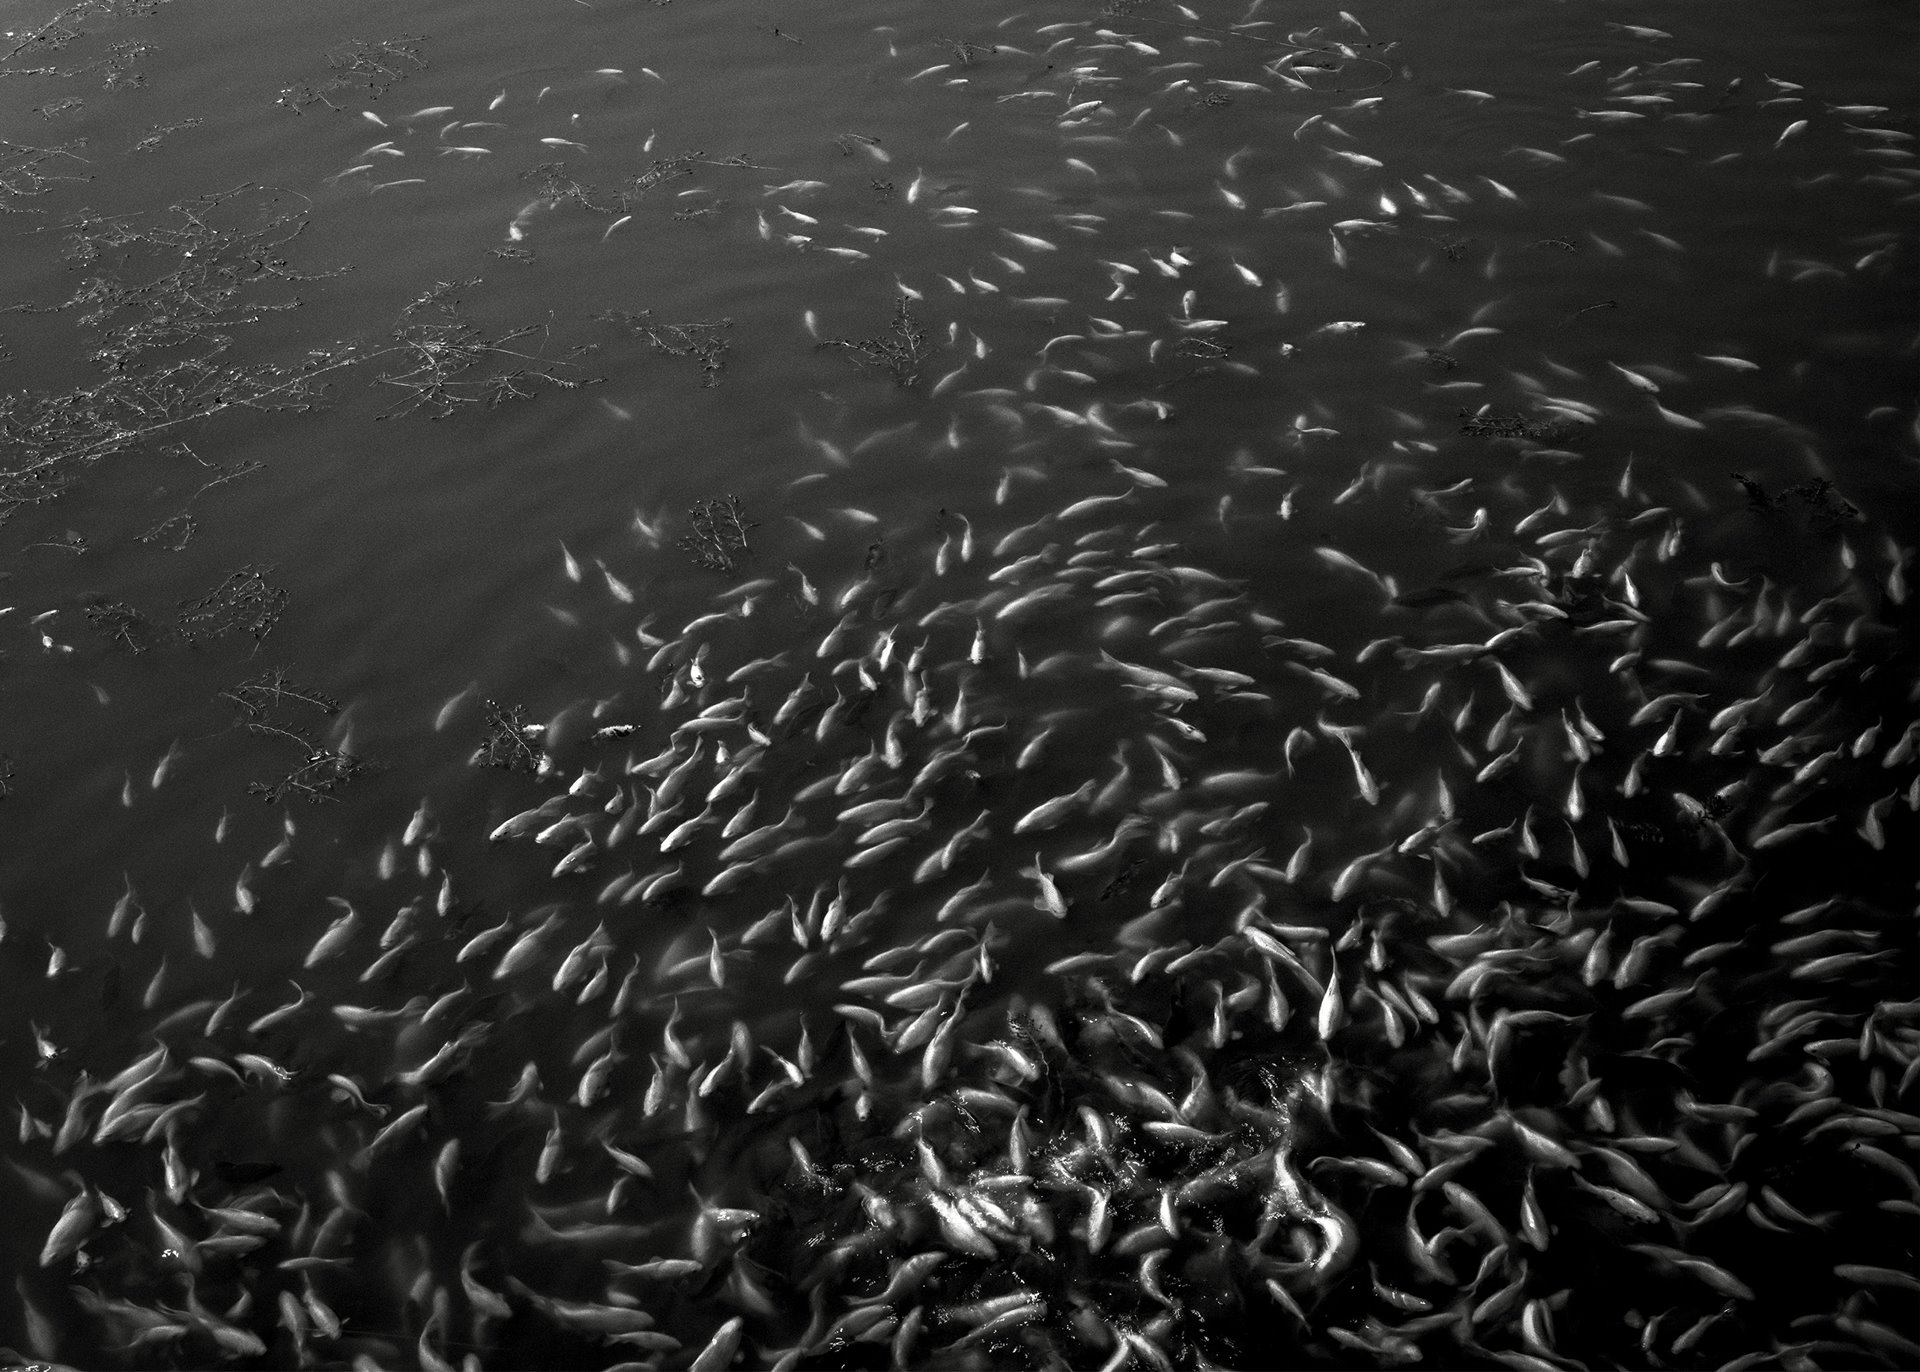 On the day Jiuer released the fish, the other fish in the pond were swimming frantically, as if they were souls eager to go ashore. Jiuer passed away a few days later. Liaoning, China.